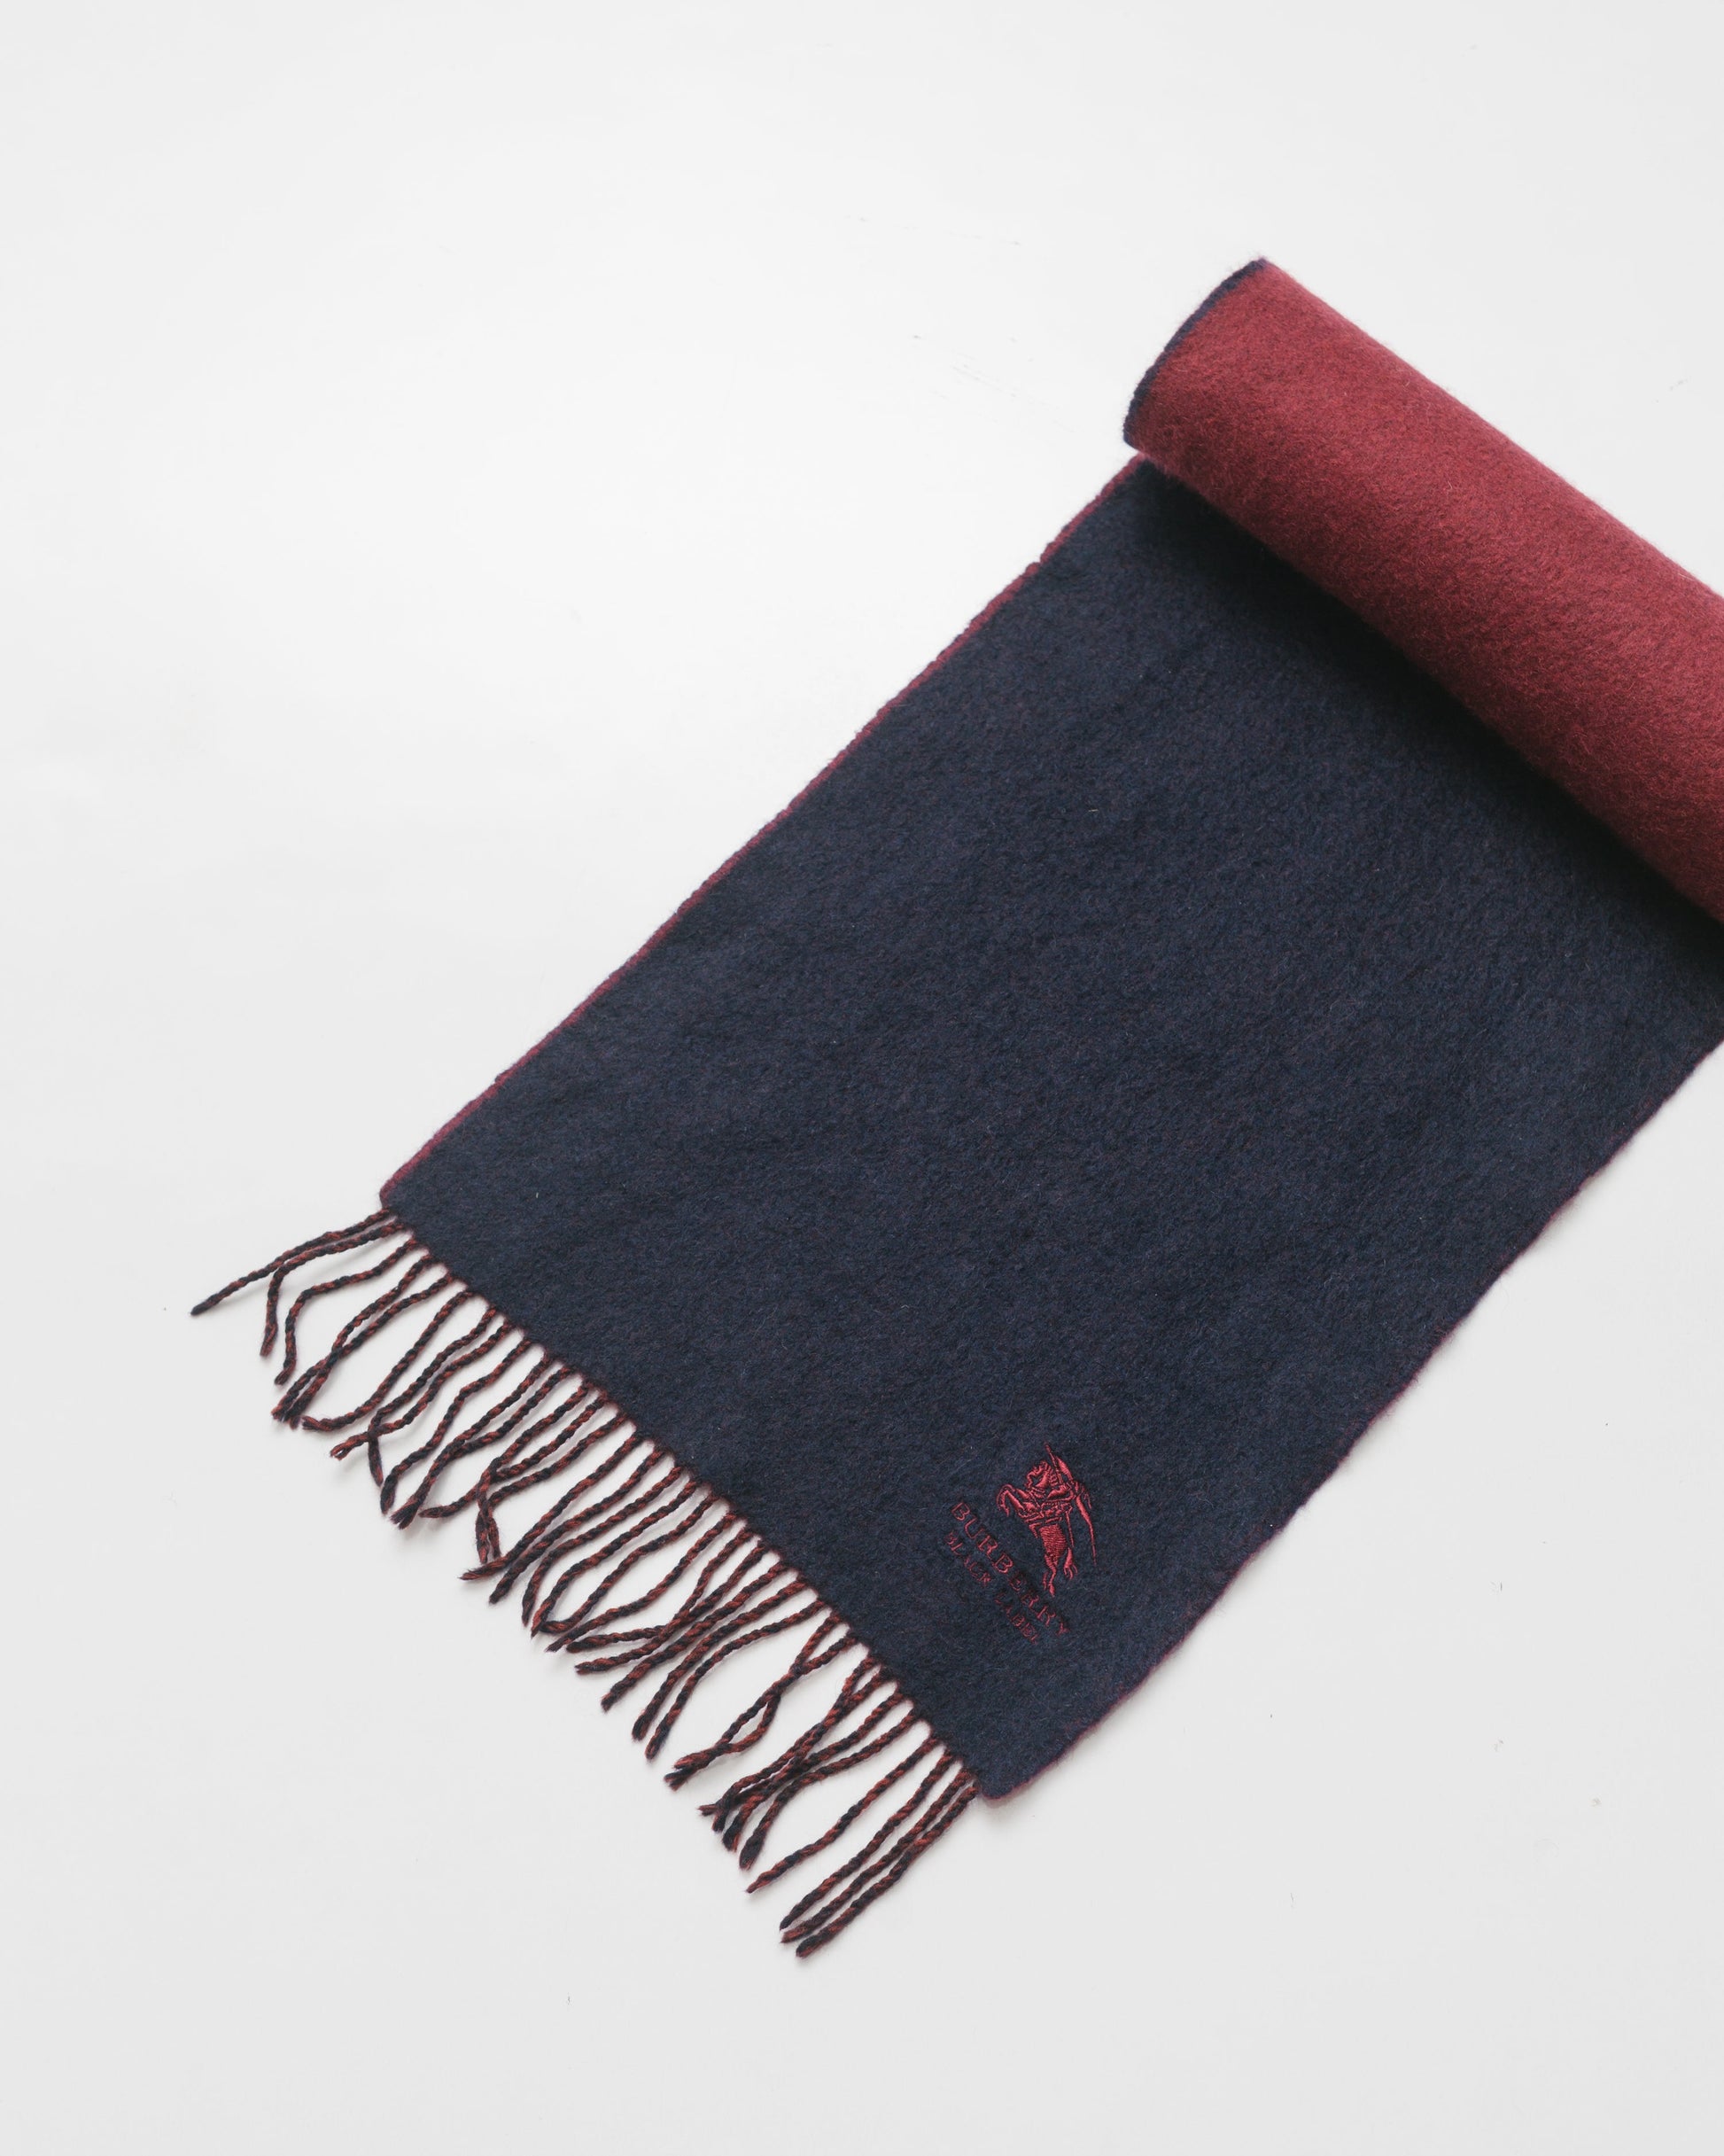 Burberry Black Label Dual Toned Scarf